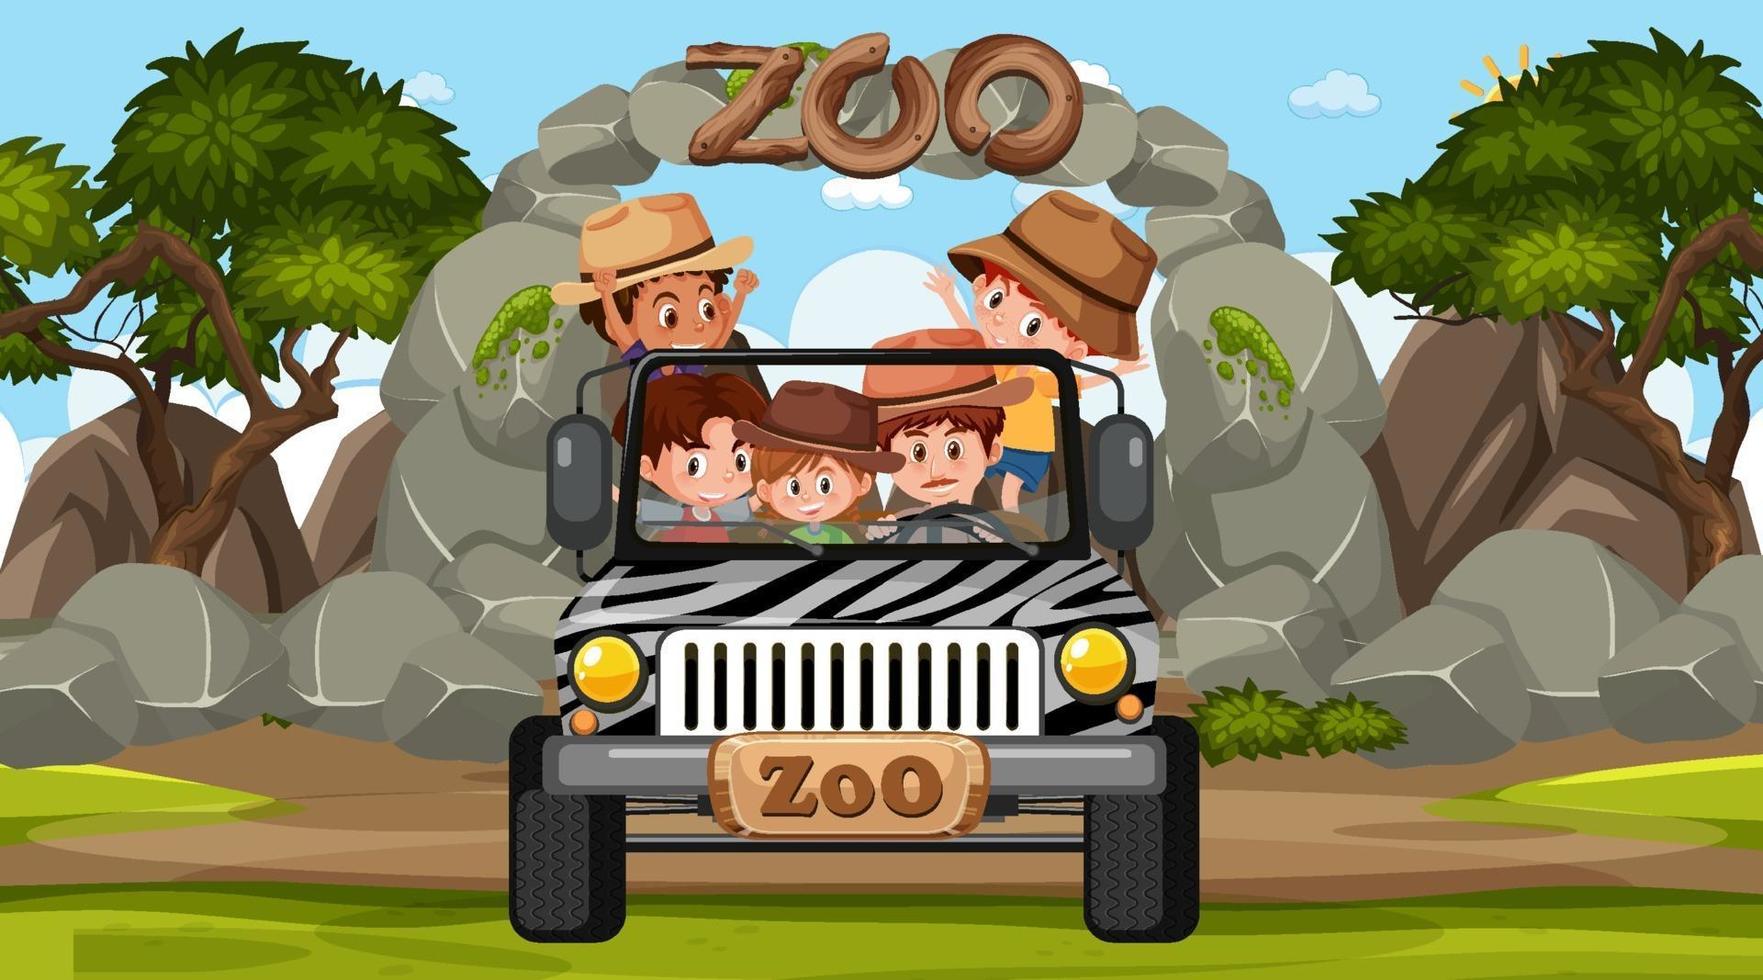 Zoo at day time scene with many kids in a jeep car vector